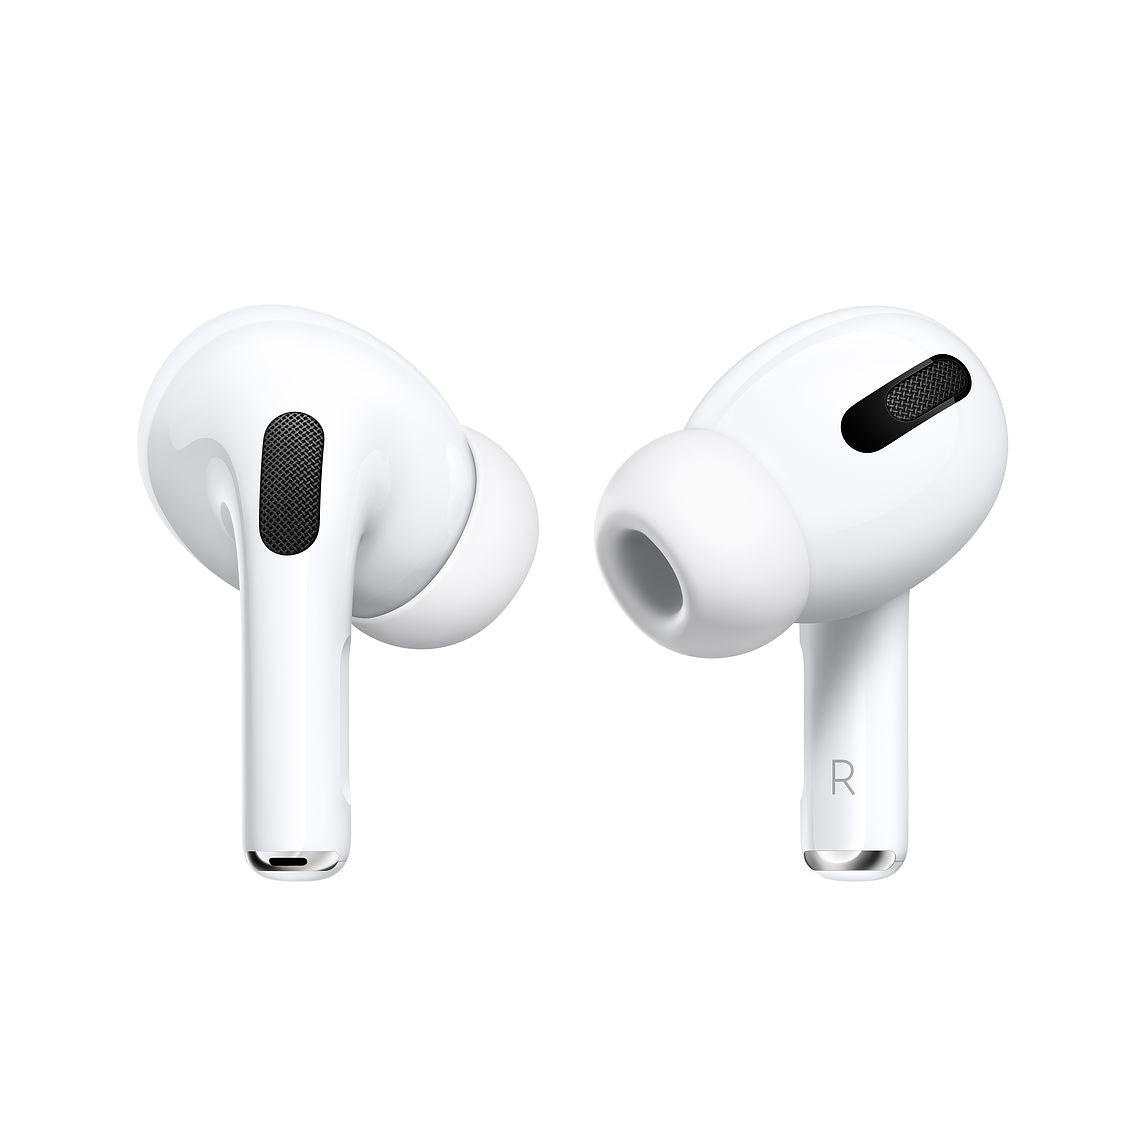 Shop All Apple Airpods at the Best Prices in qatar at tamimiprojects.com